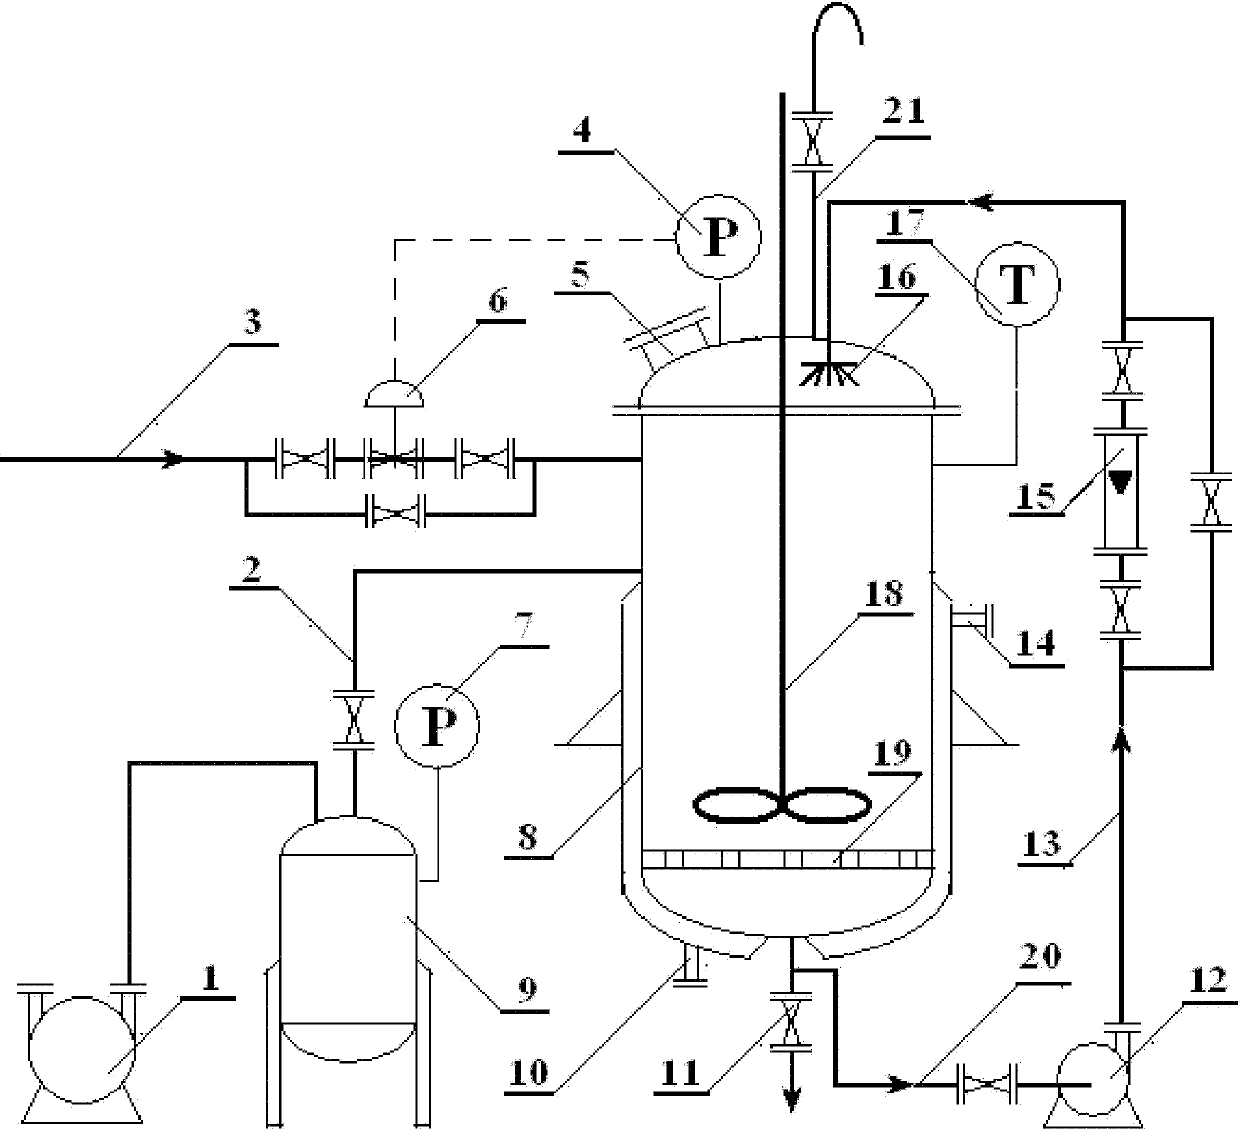 Technological method for preparing sulbactam by means of recycle hydrogen reduction